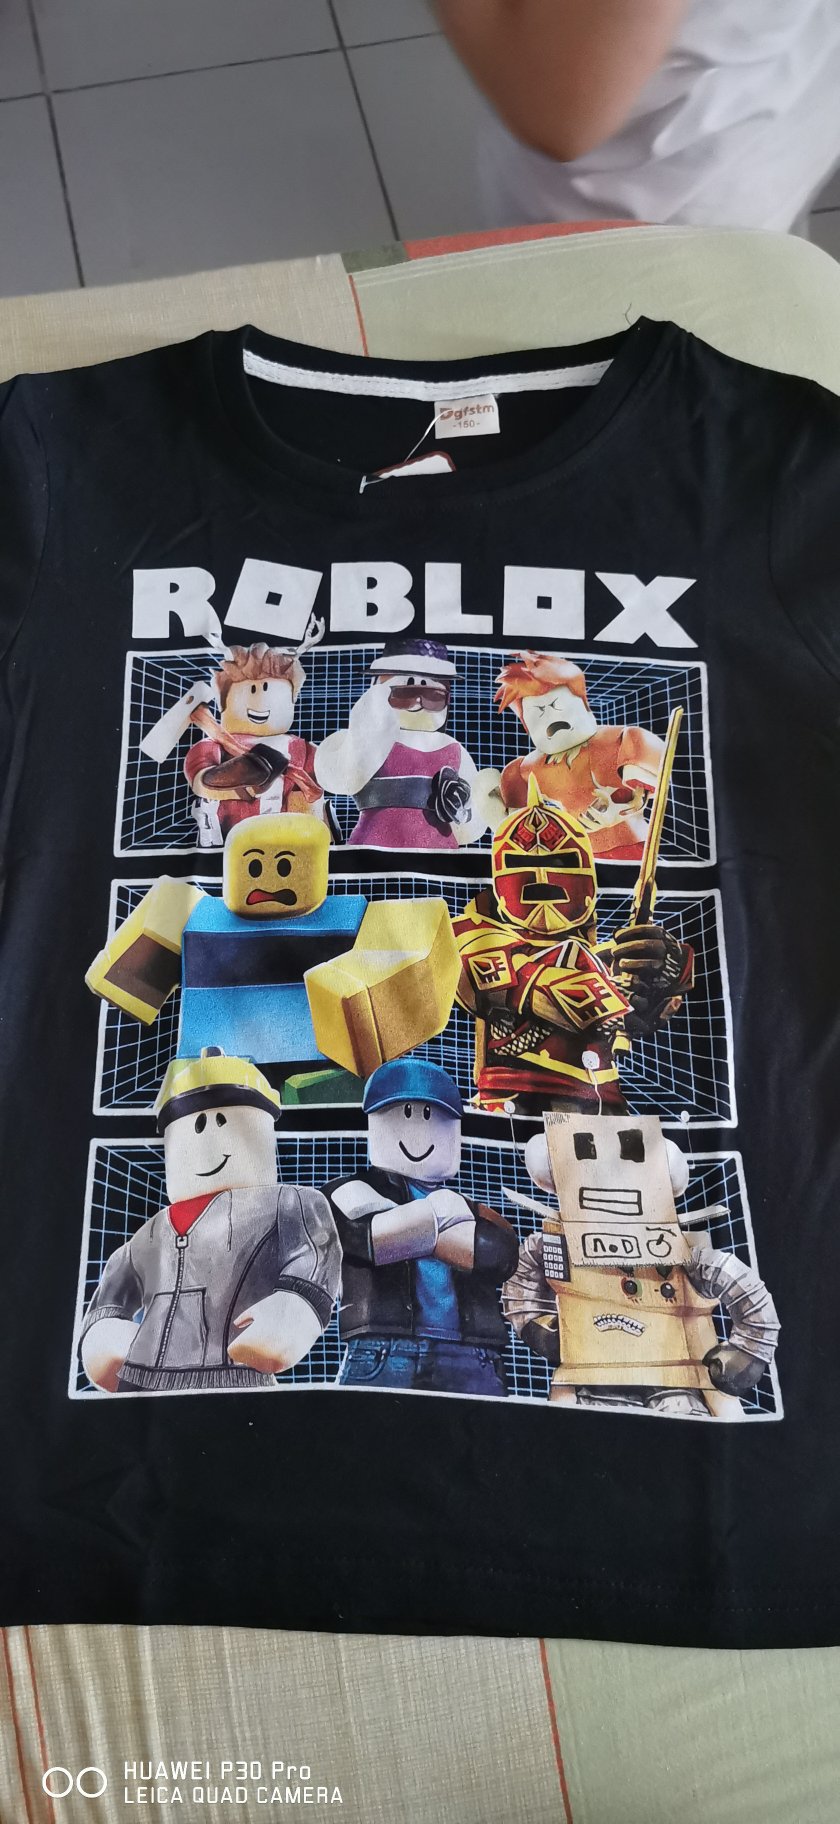 Roblox Kids T Shirts For Boys And Girls Tops Cartoon Tee Shirts Pure Cotton Shopee Philippines - roblox characters kids online cartoon boys girls birthday gift top t shirt 785 funny casual tshirt quality t shirts t shirt slogans from